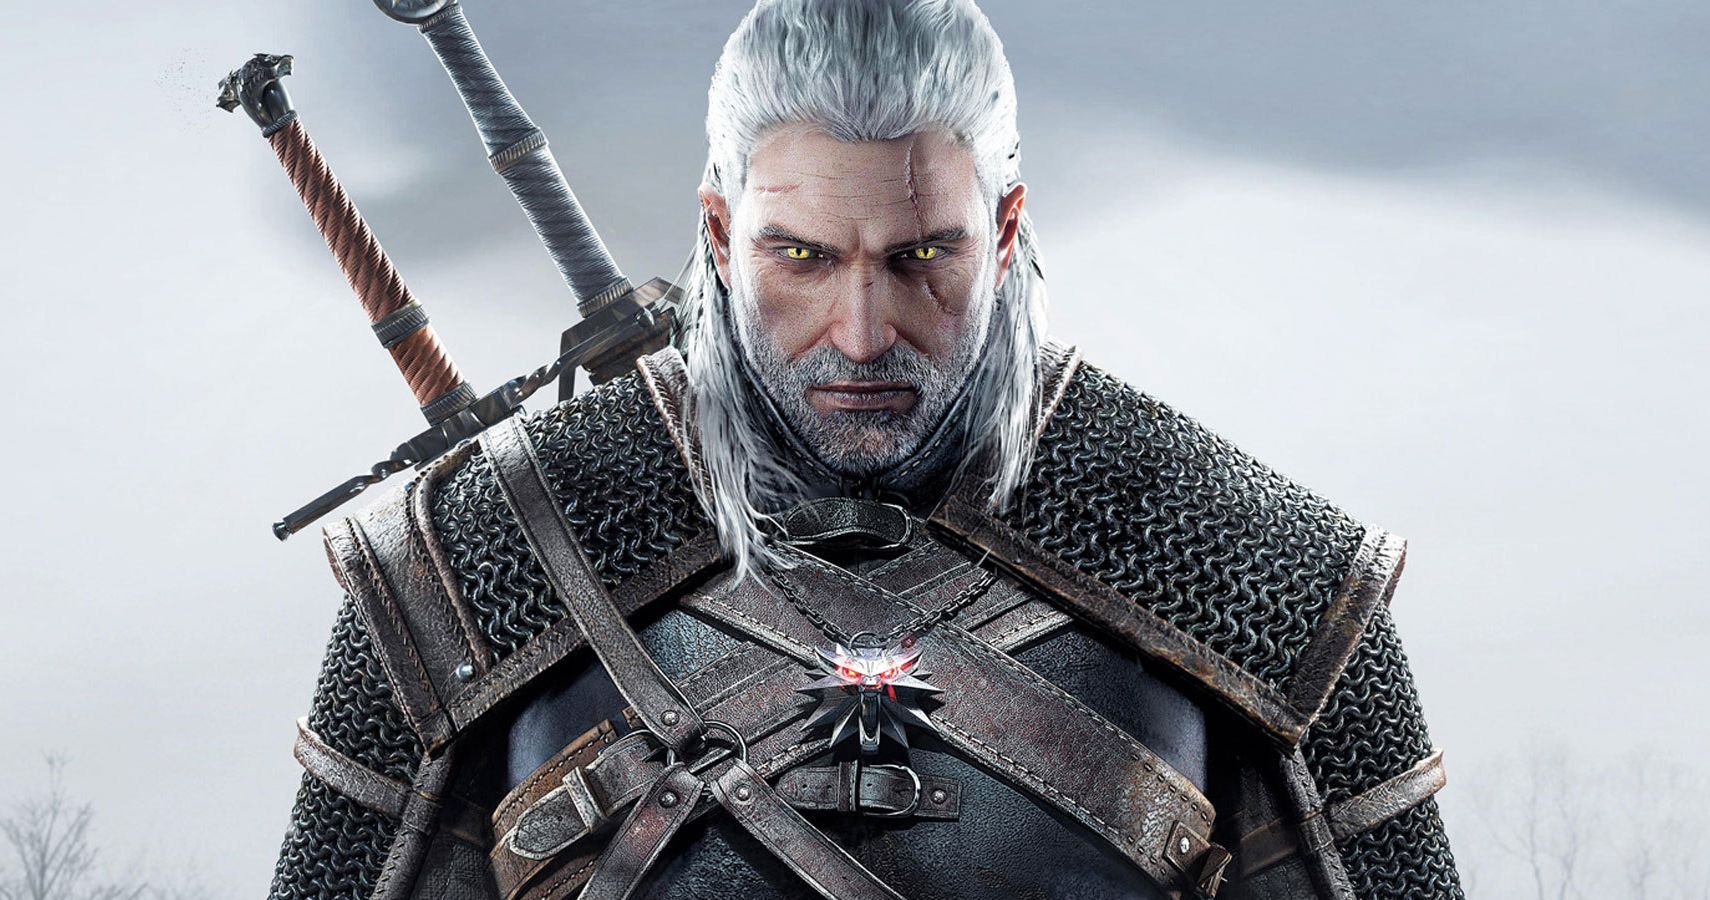 geralt-of-rivia-things-didnt-know-witcher-3-featured-image.jpg